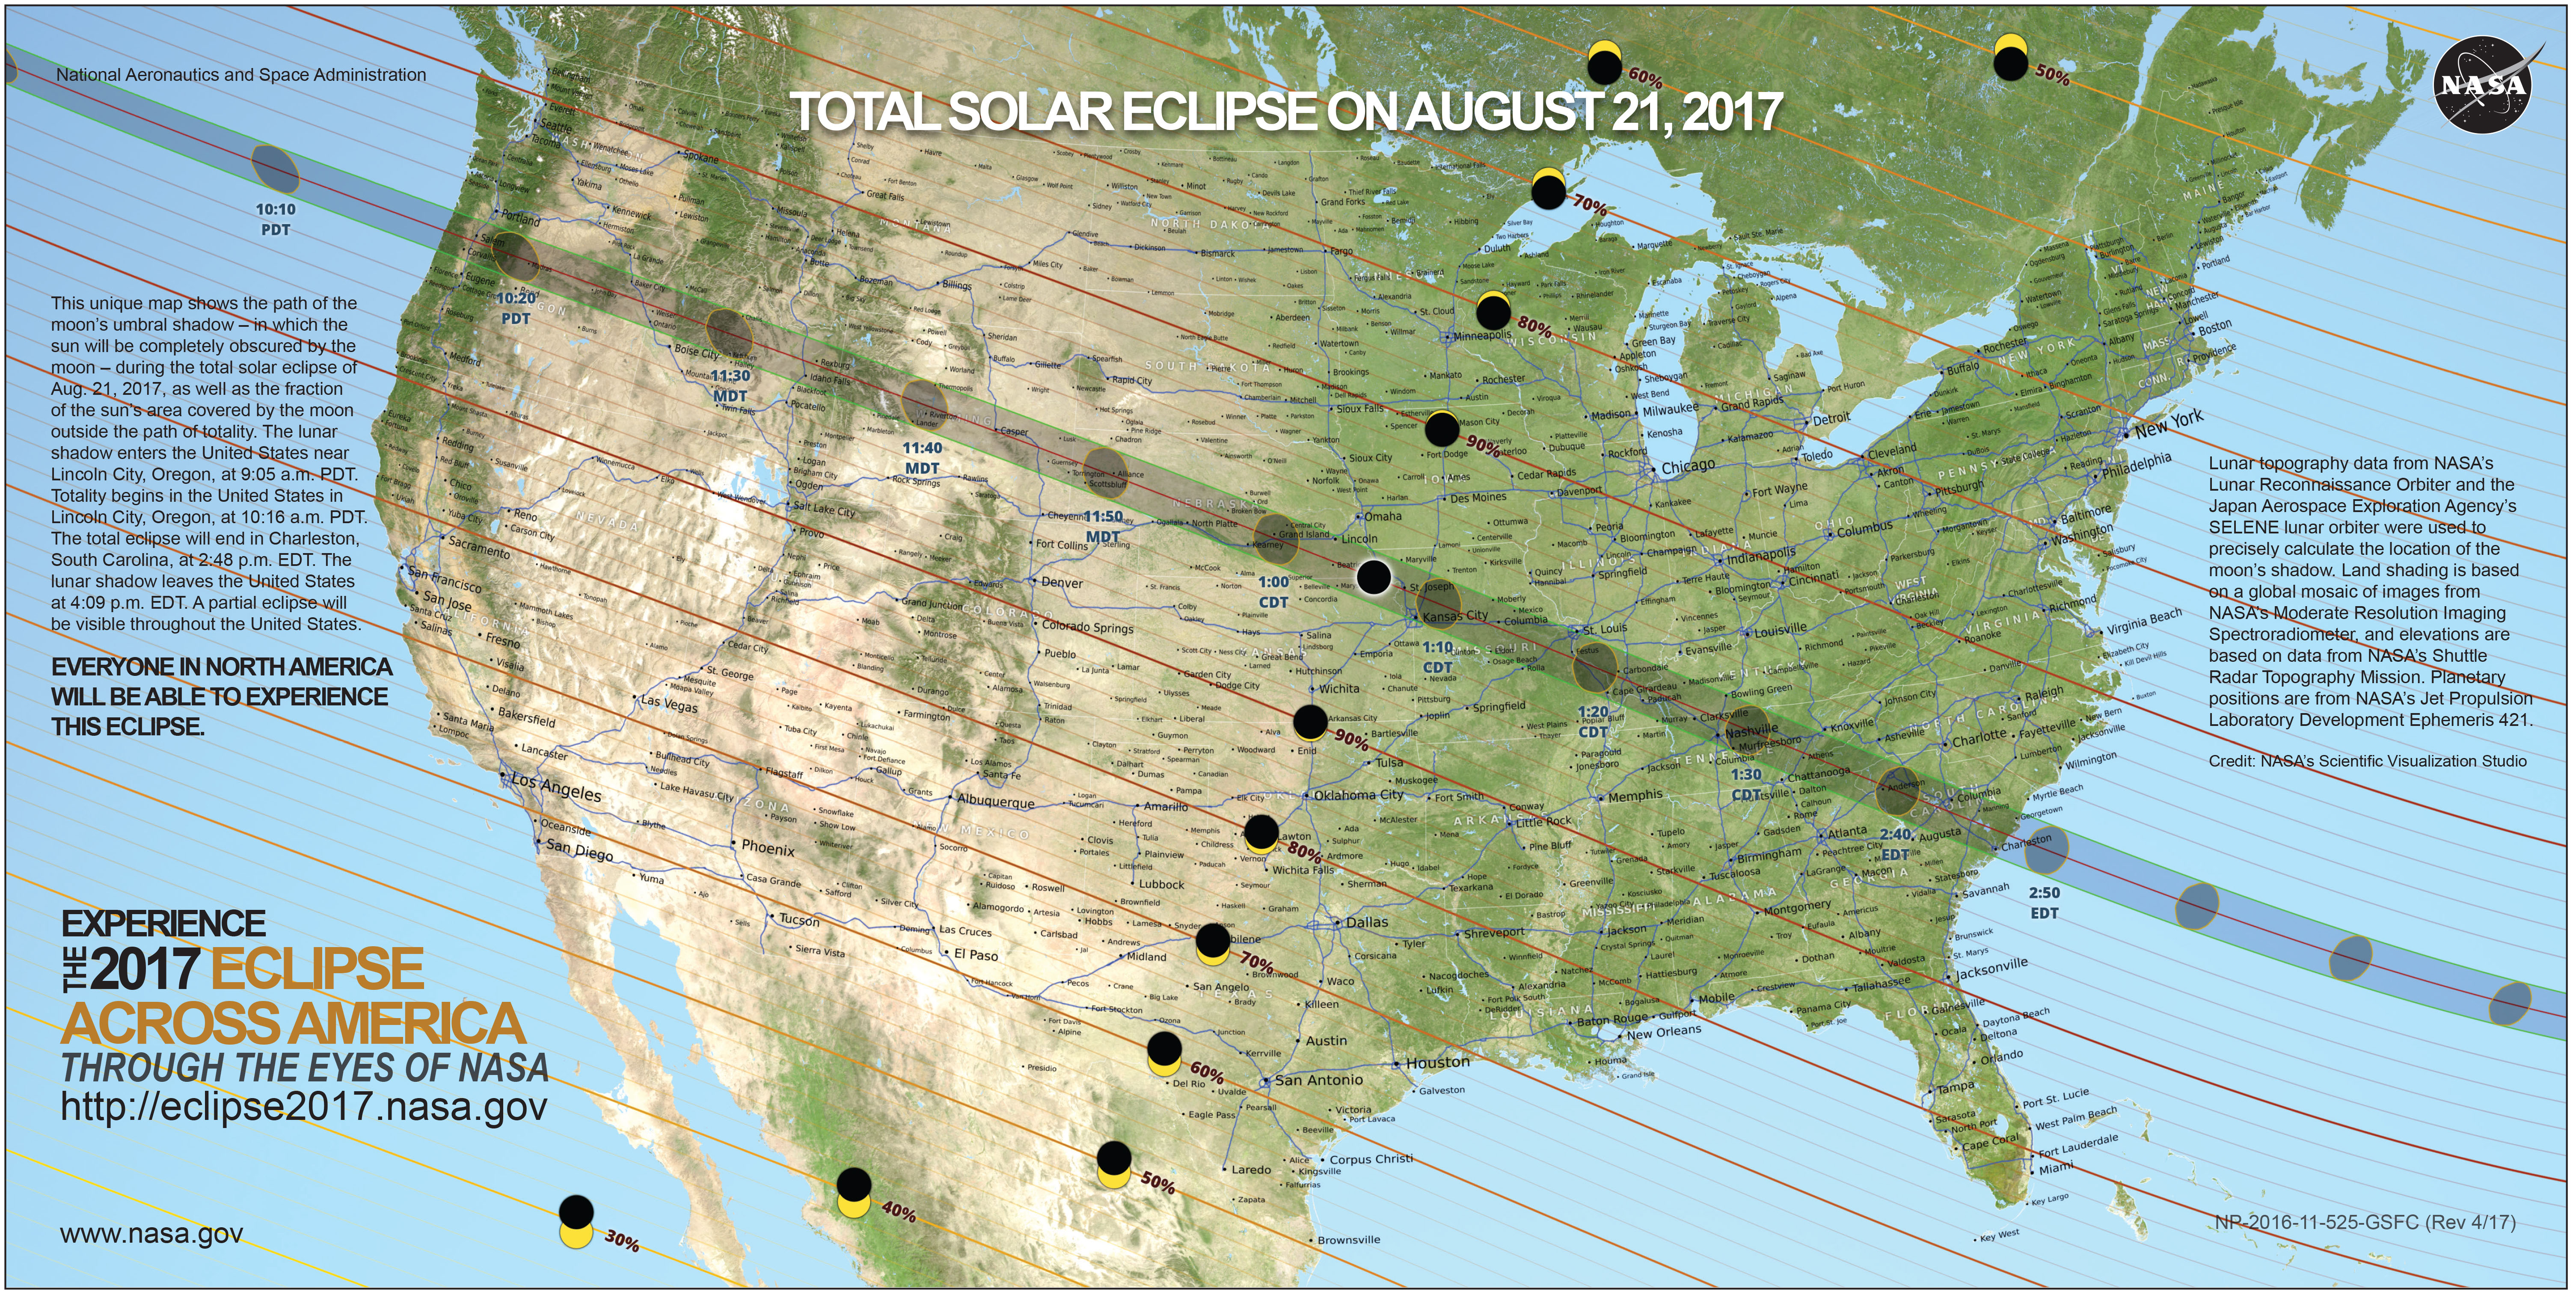 This maps shows the totality path of the solar eclipse, and what percentage of the total eclipse other areas will see when they go outside on Aug. 21. (Courtesy of Fred Espenak, NASA/Goddard Space Flight Center, from eclipse.gsfc.nasa.gov.)